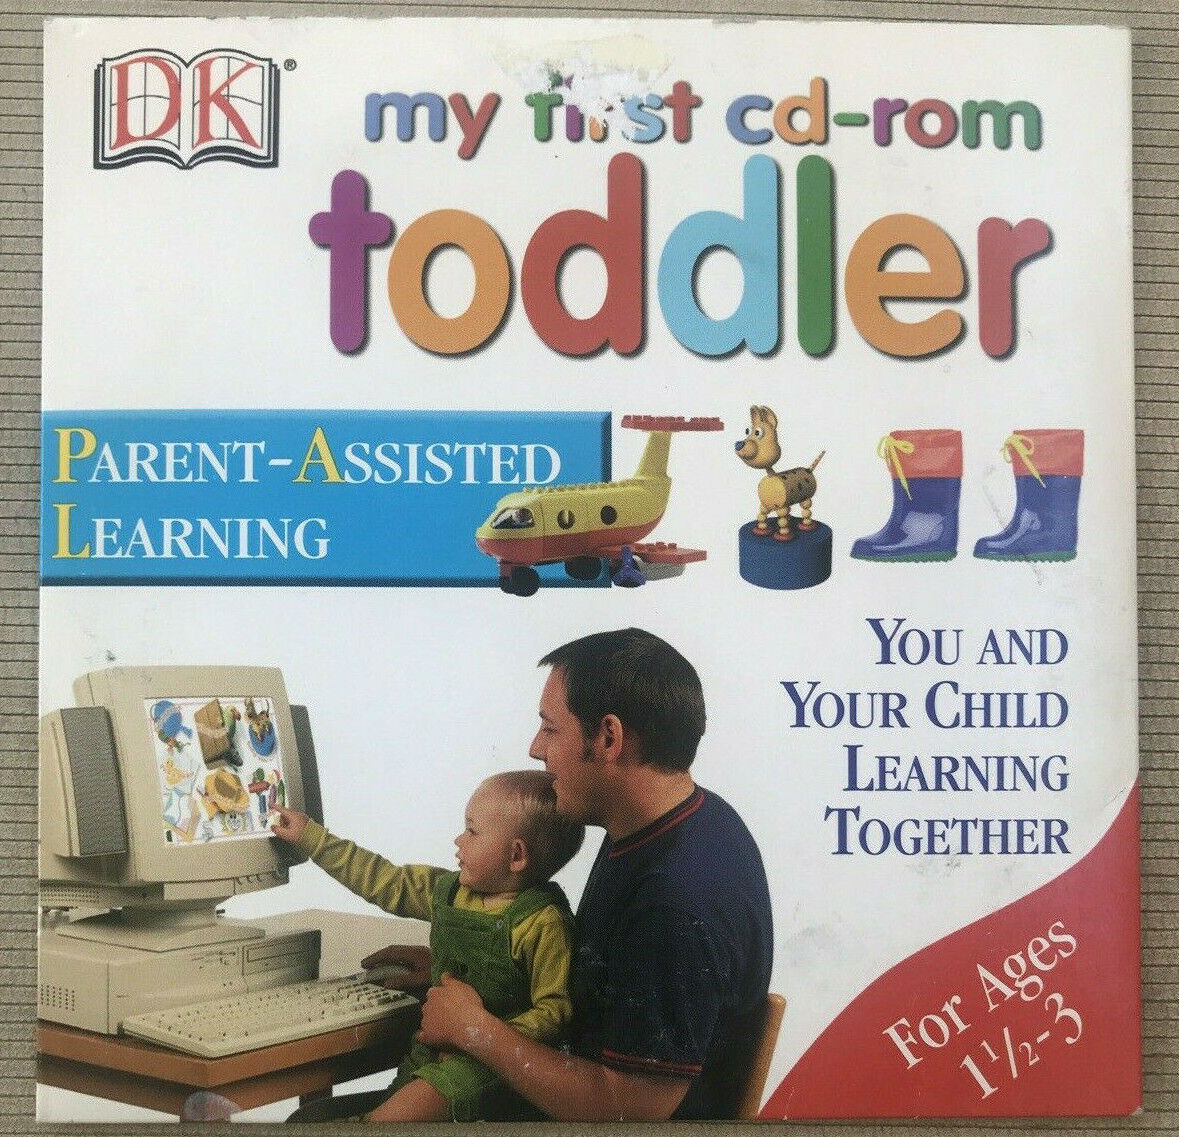 DK My First CD-ROM Toddler - Parent Assisted Learning Ages 1 1/2 - 3 Educational